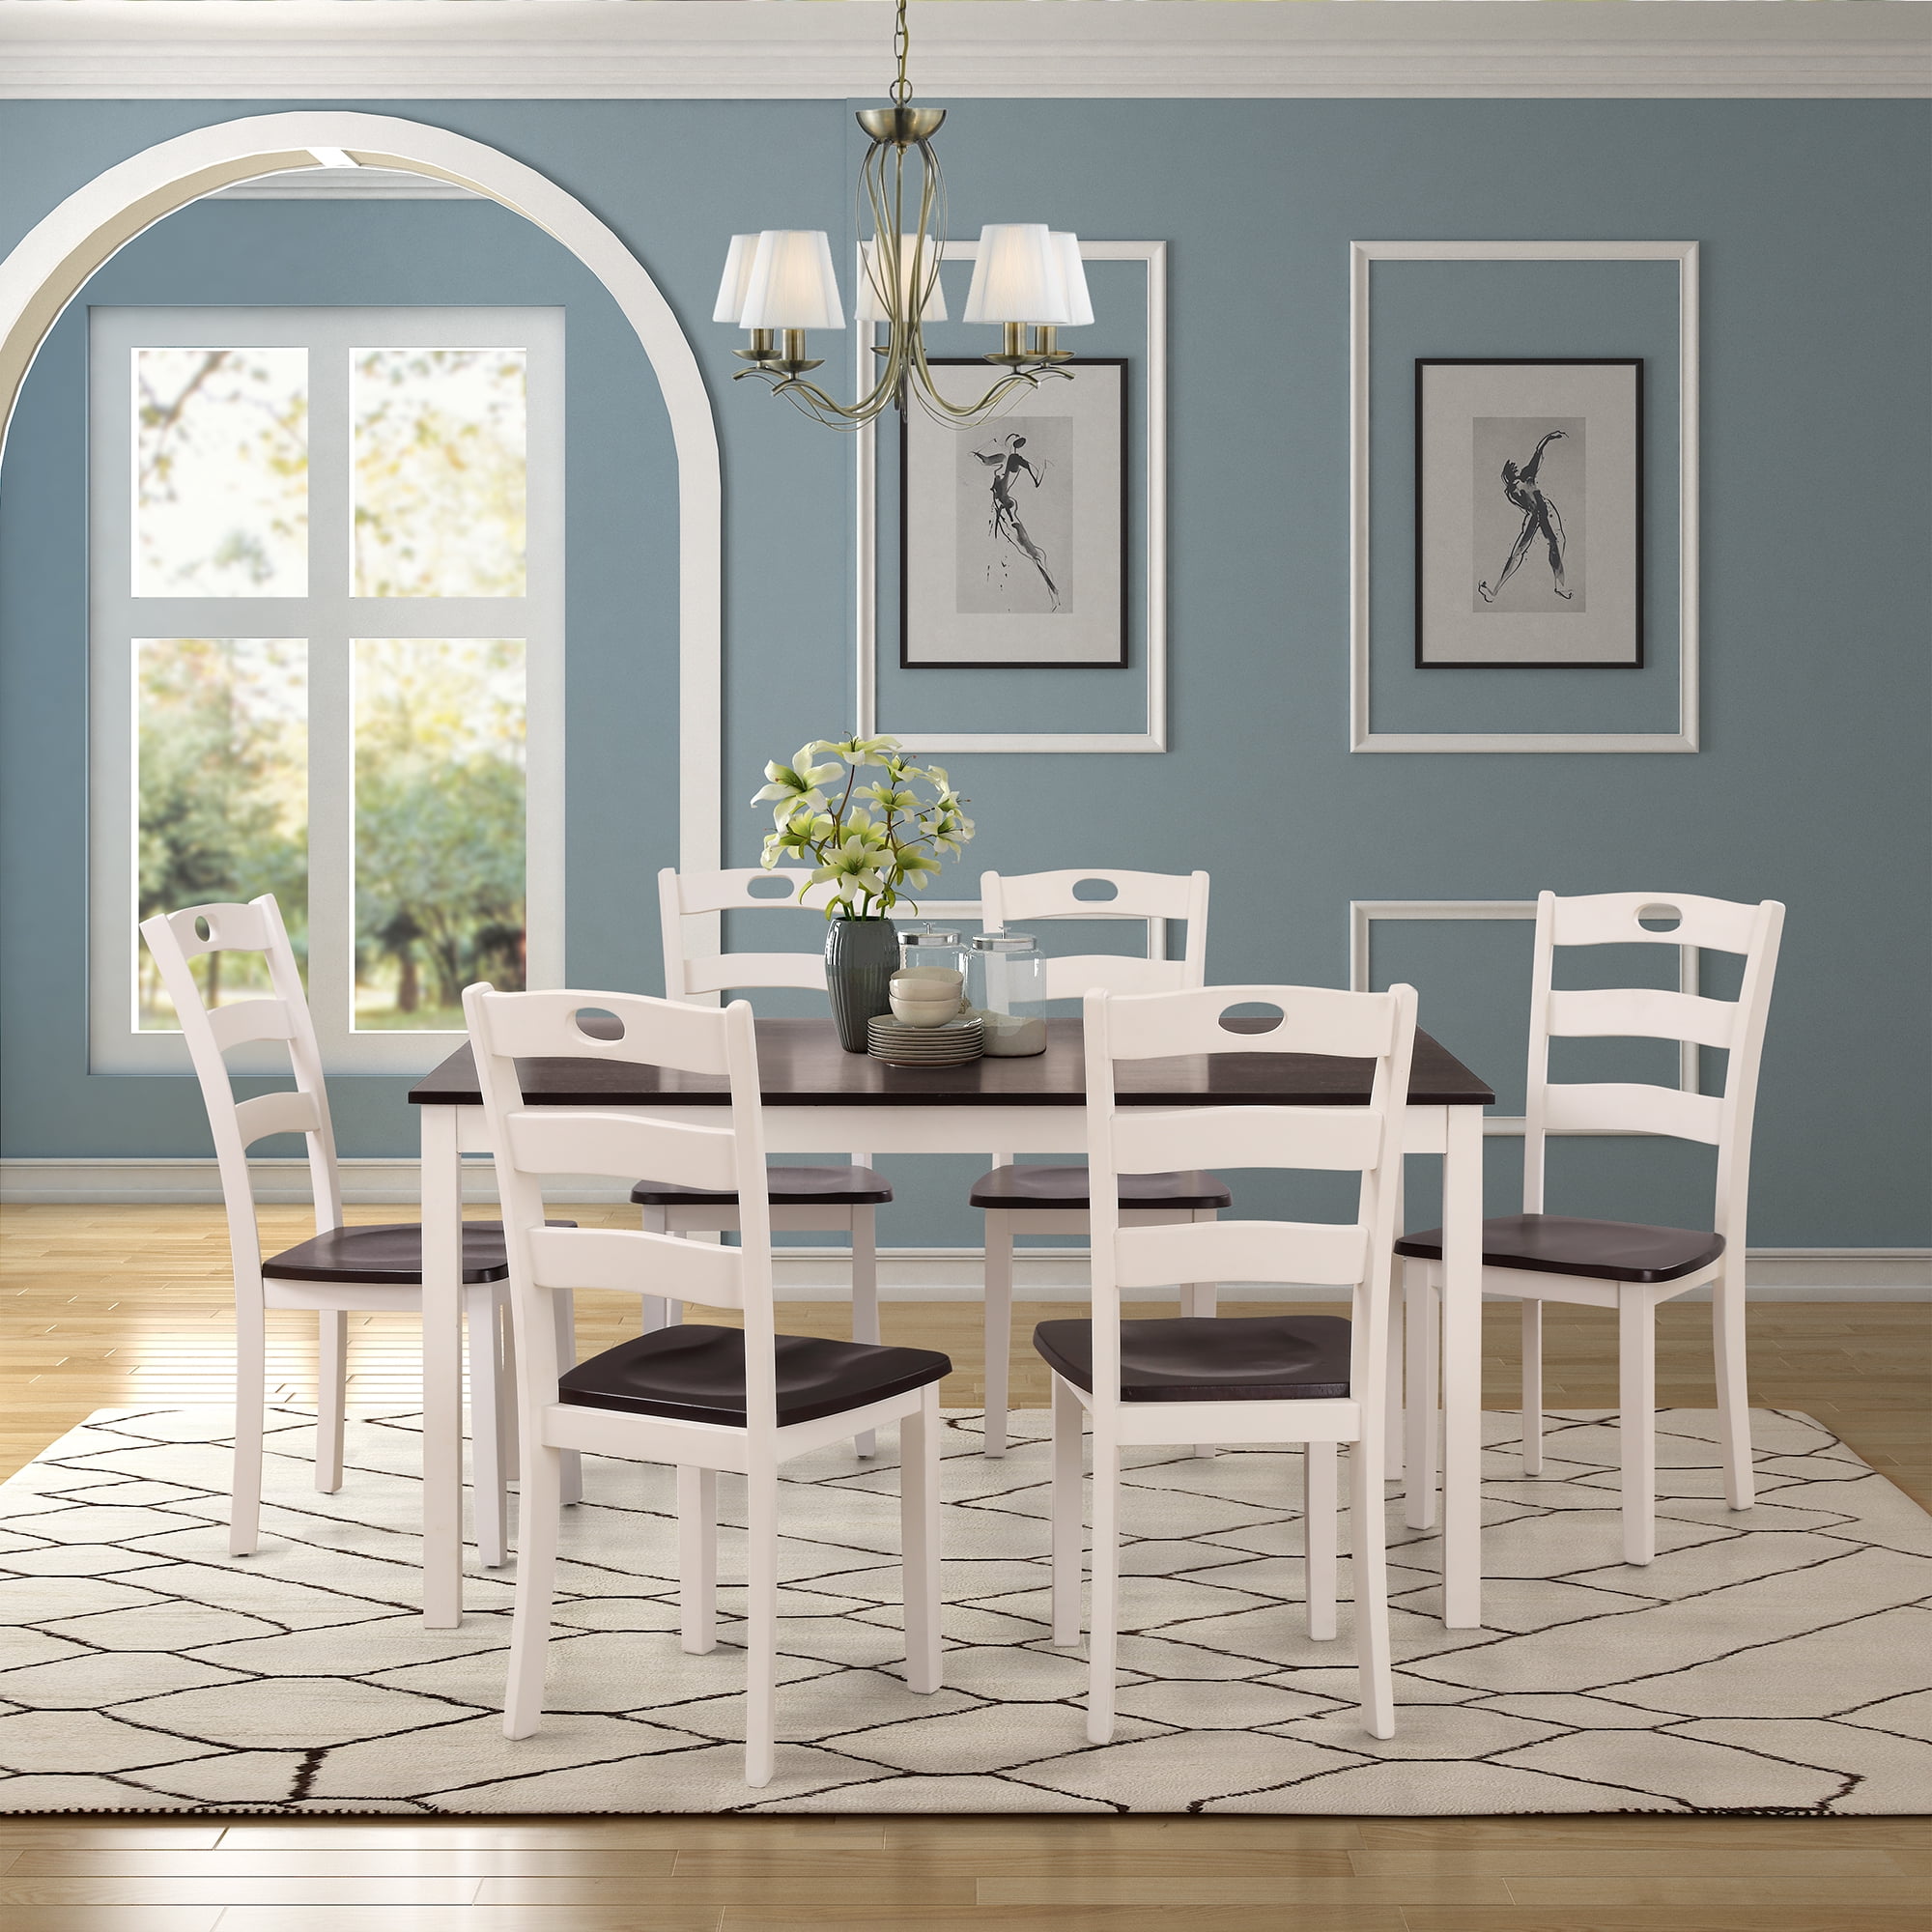 Clearance!7 Piece Dining Table Set, Modern Kitchen Table Sets with